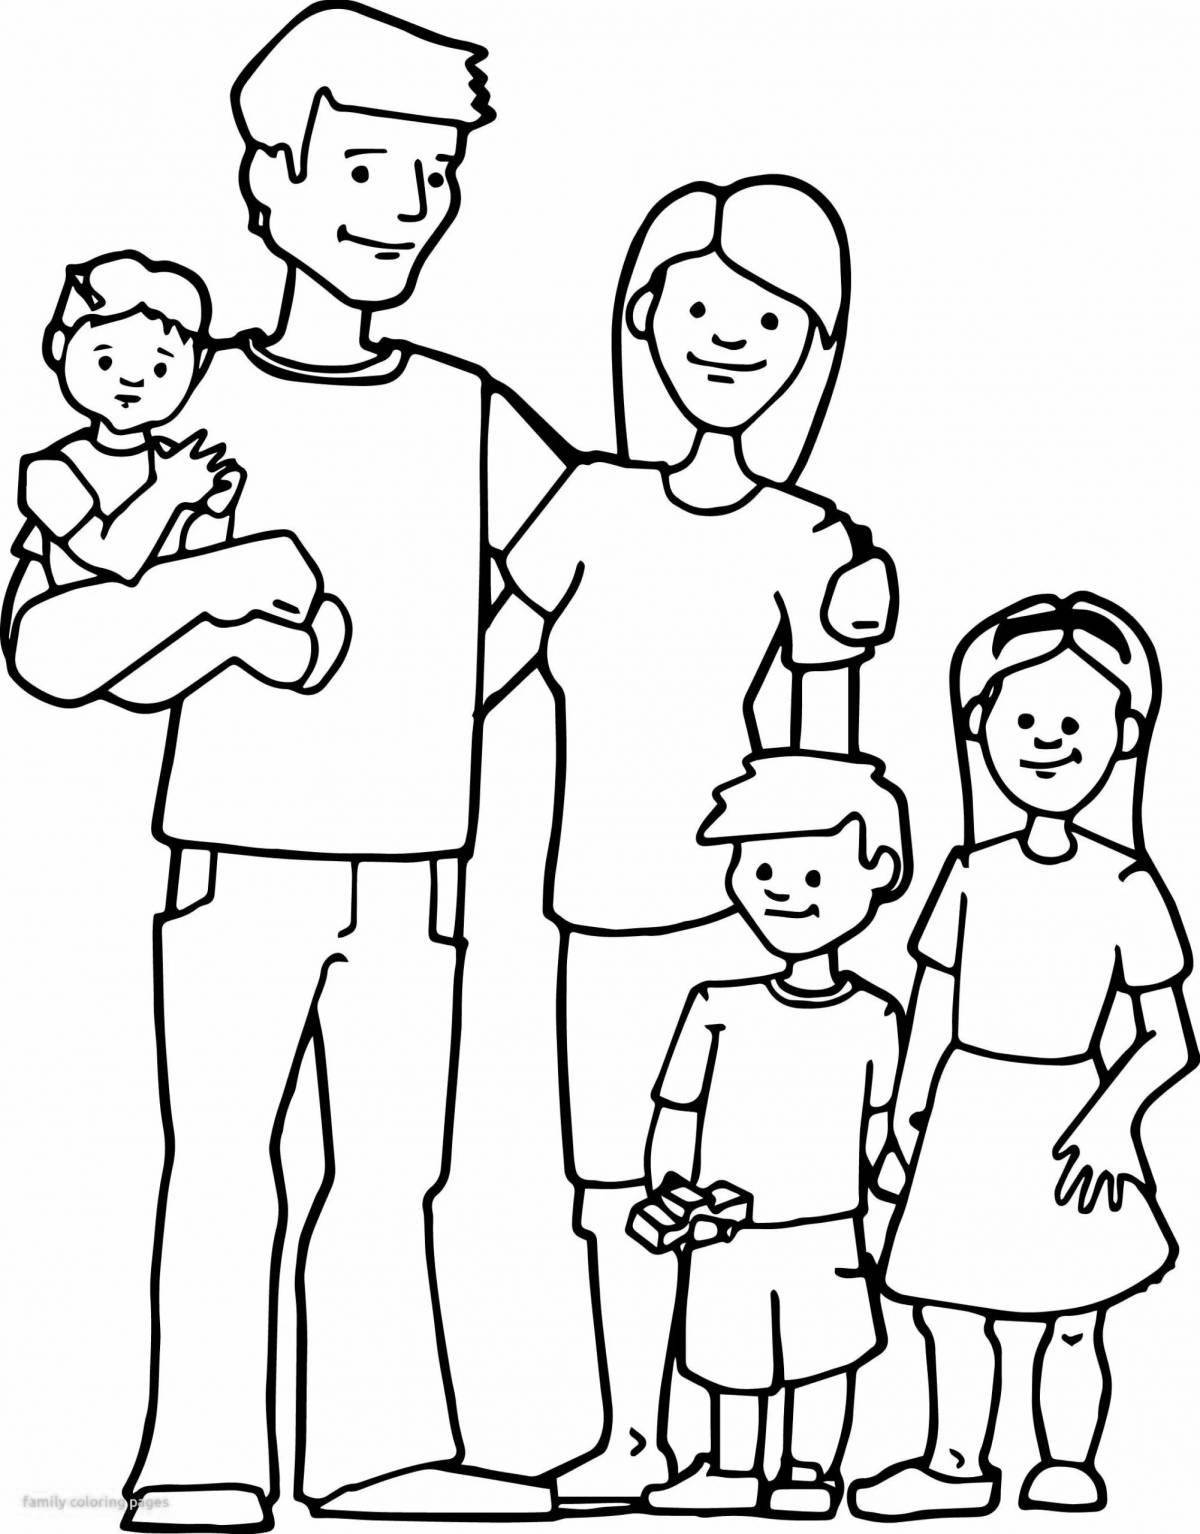 Bright coloring mom and dad for kids